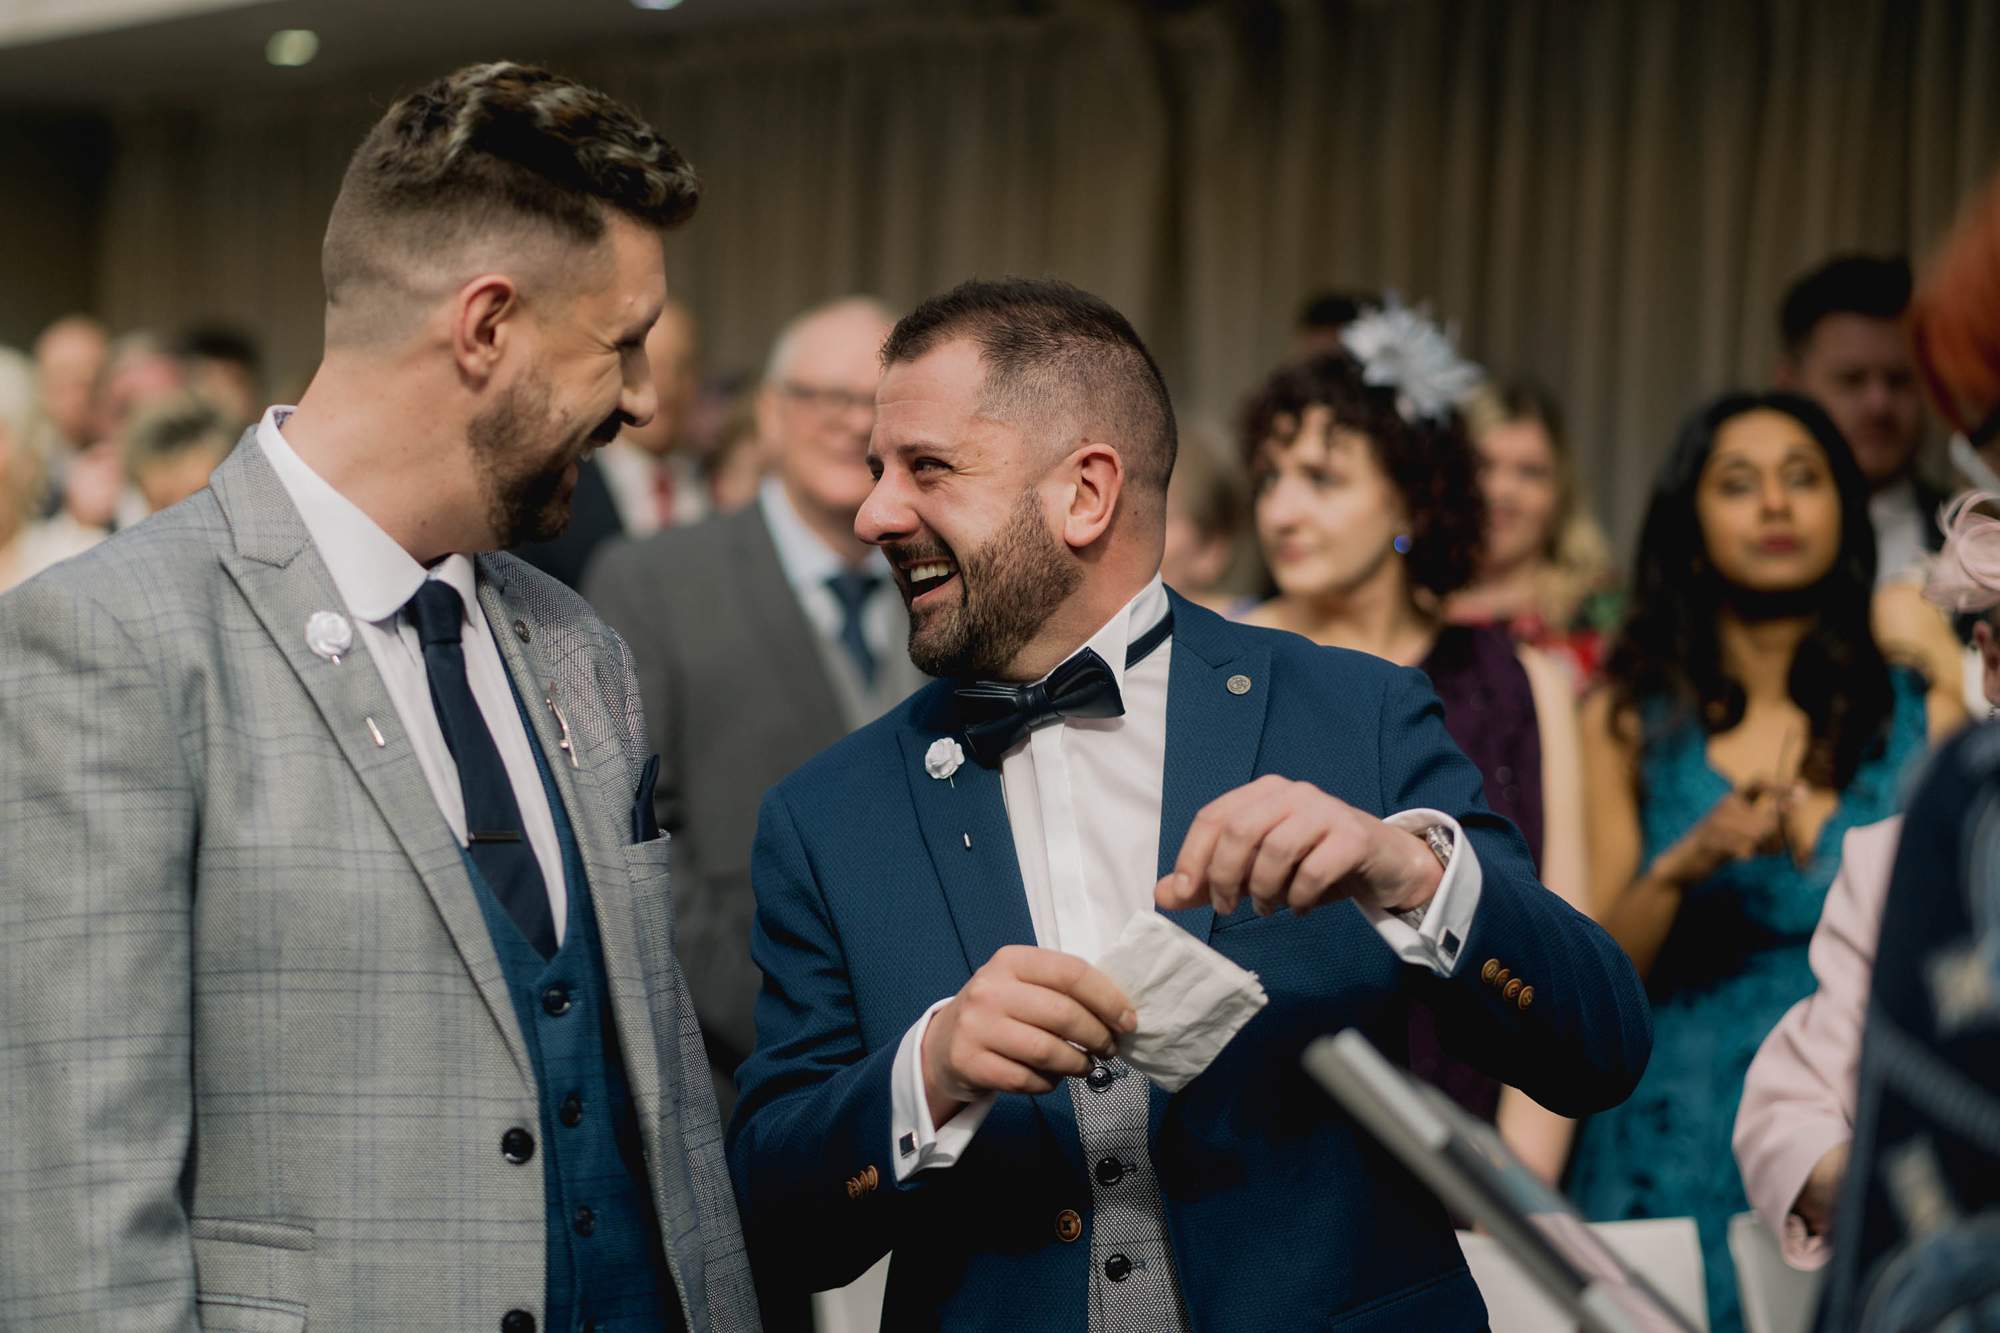 Two grooms share a moment during their wedding ceremony at Wickwoods Country Club in East Sussex.